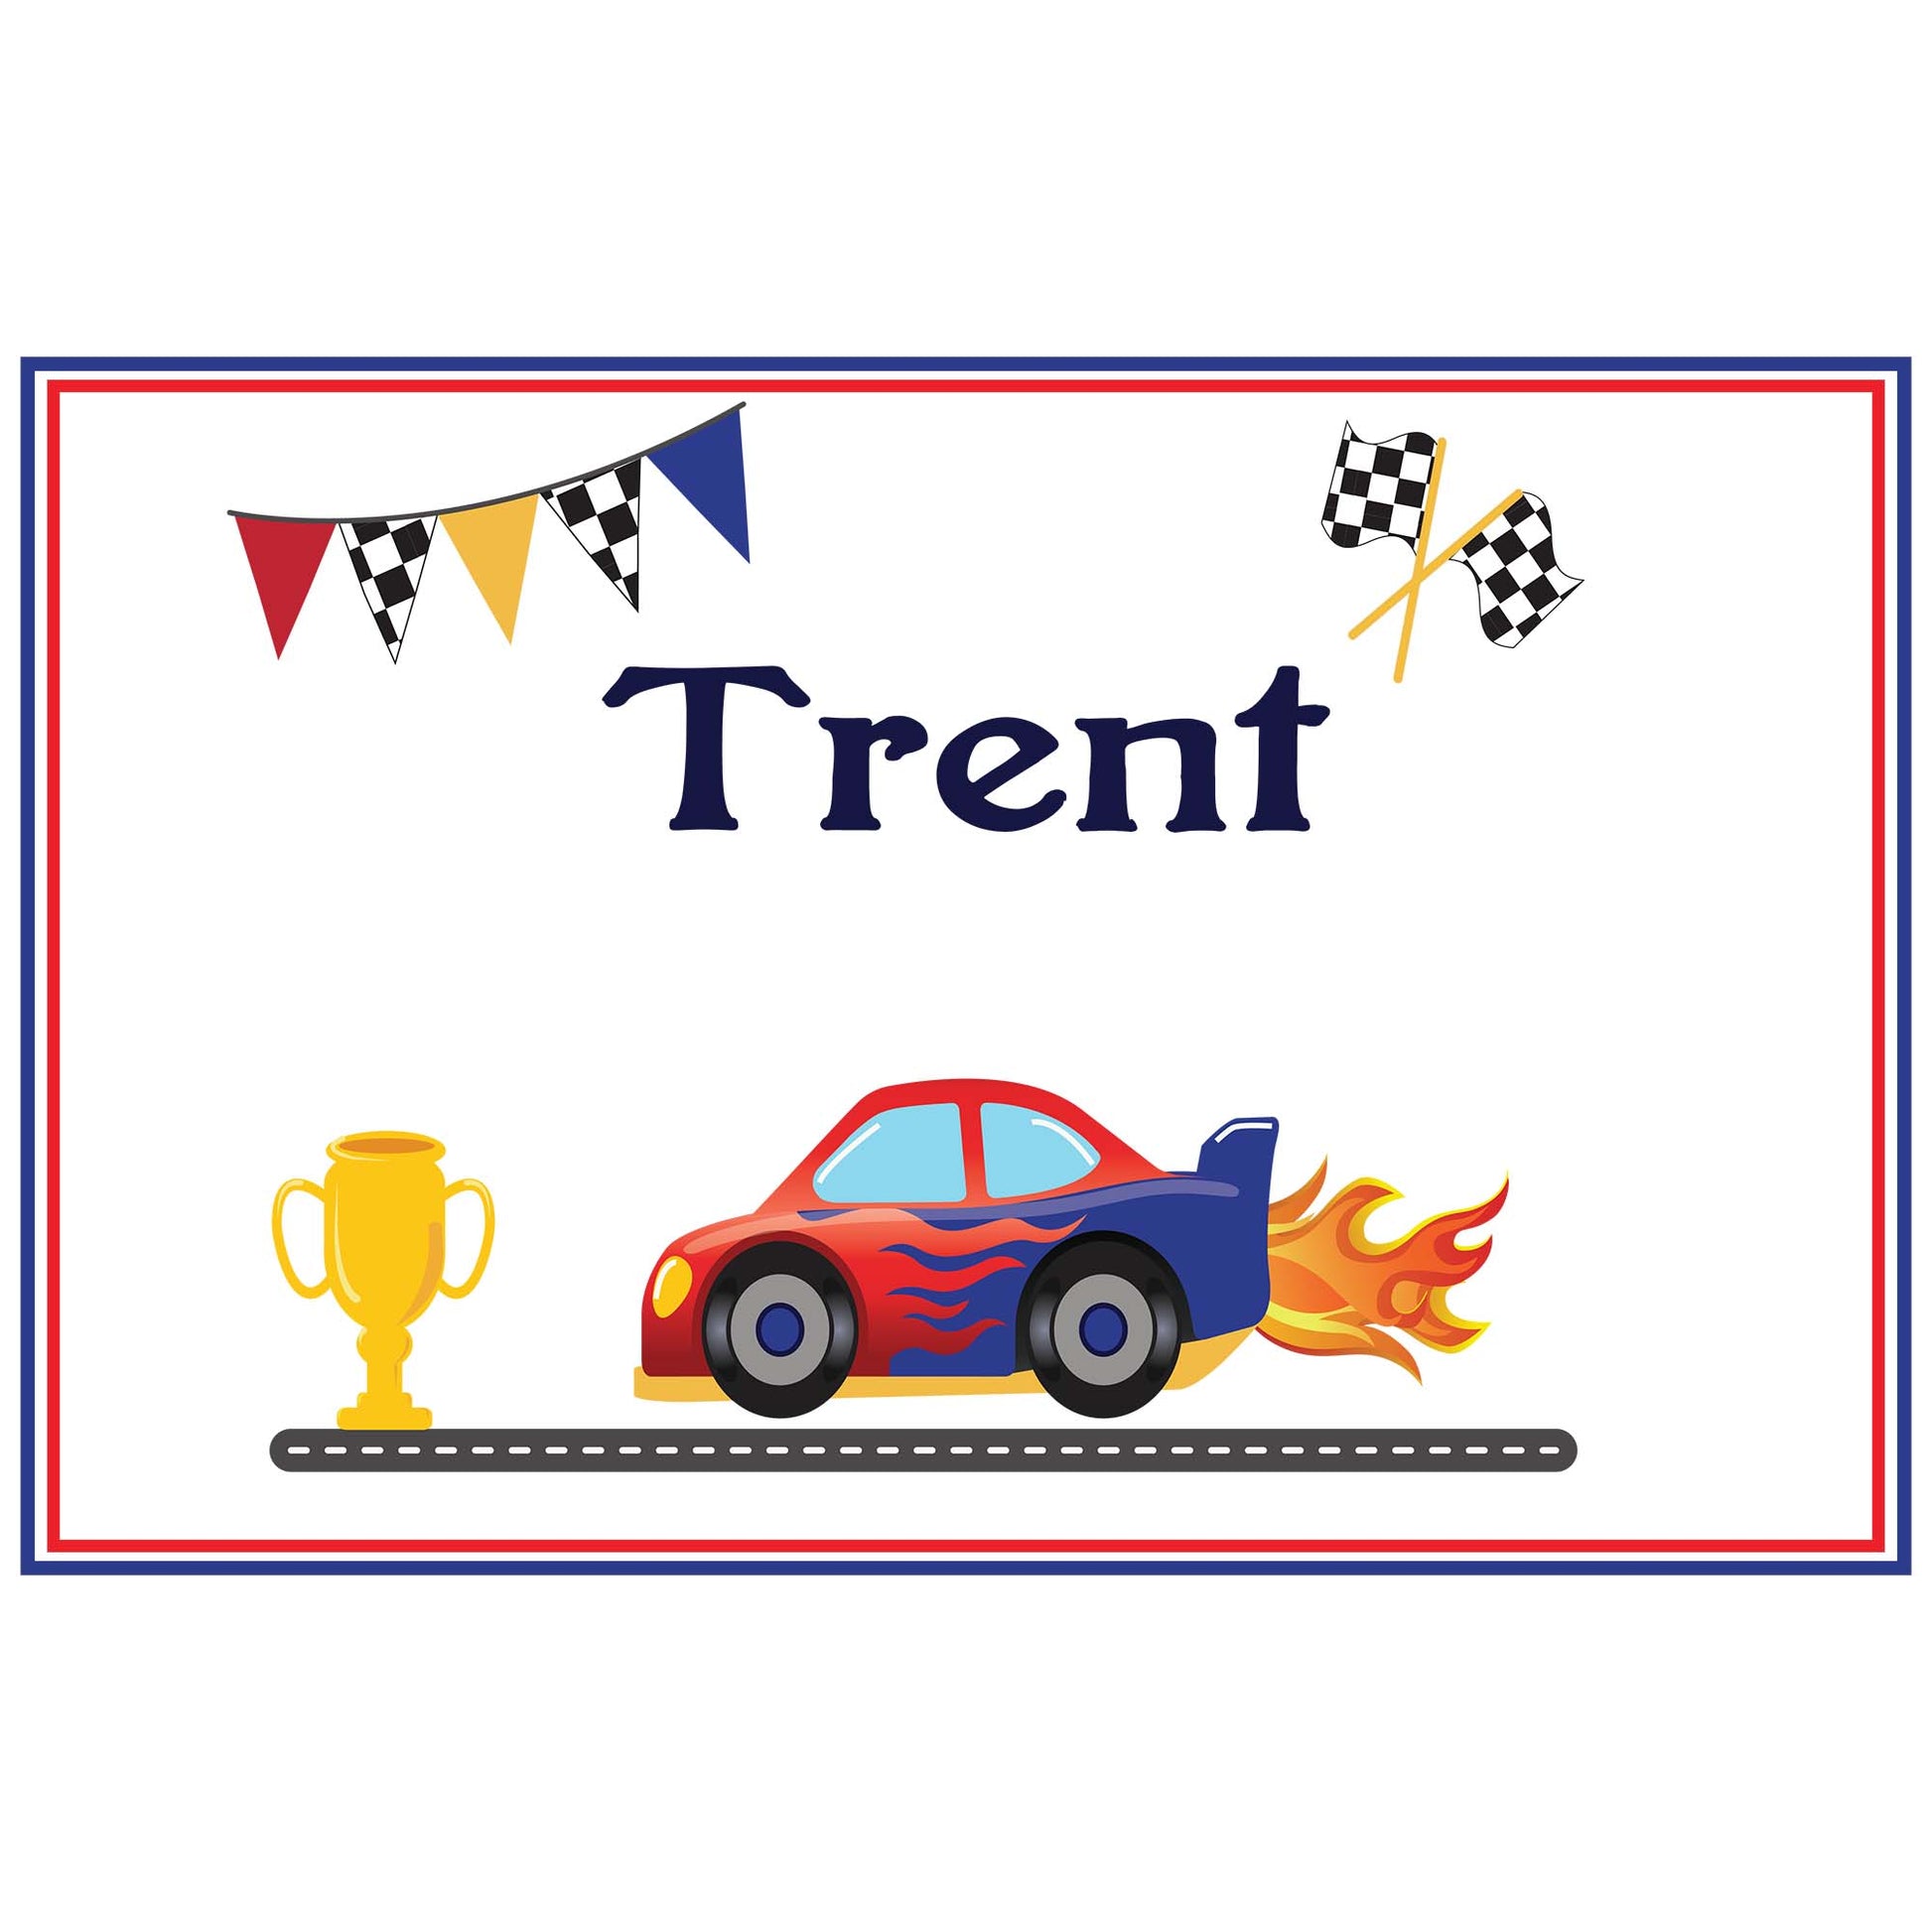 Personalized Placemat with Race Cars design